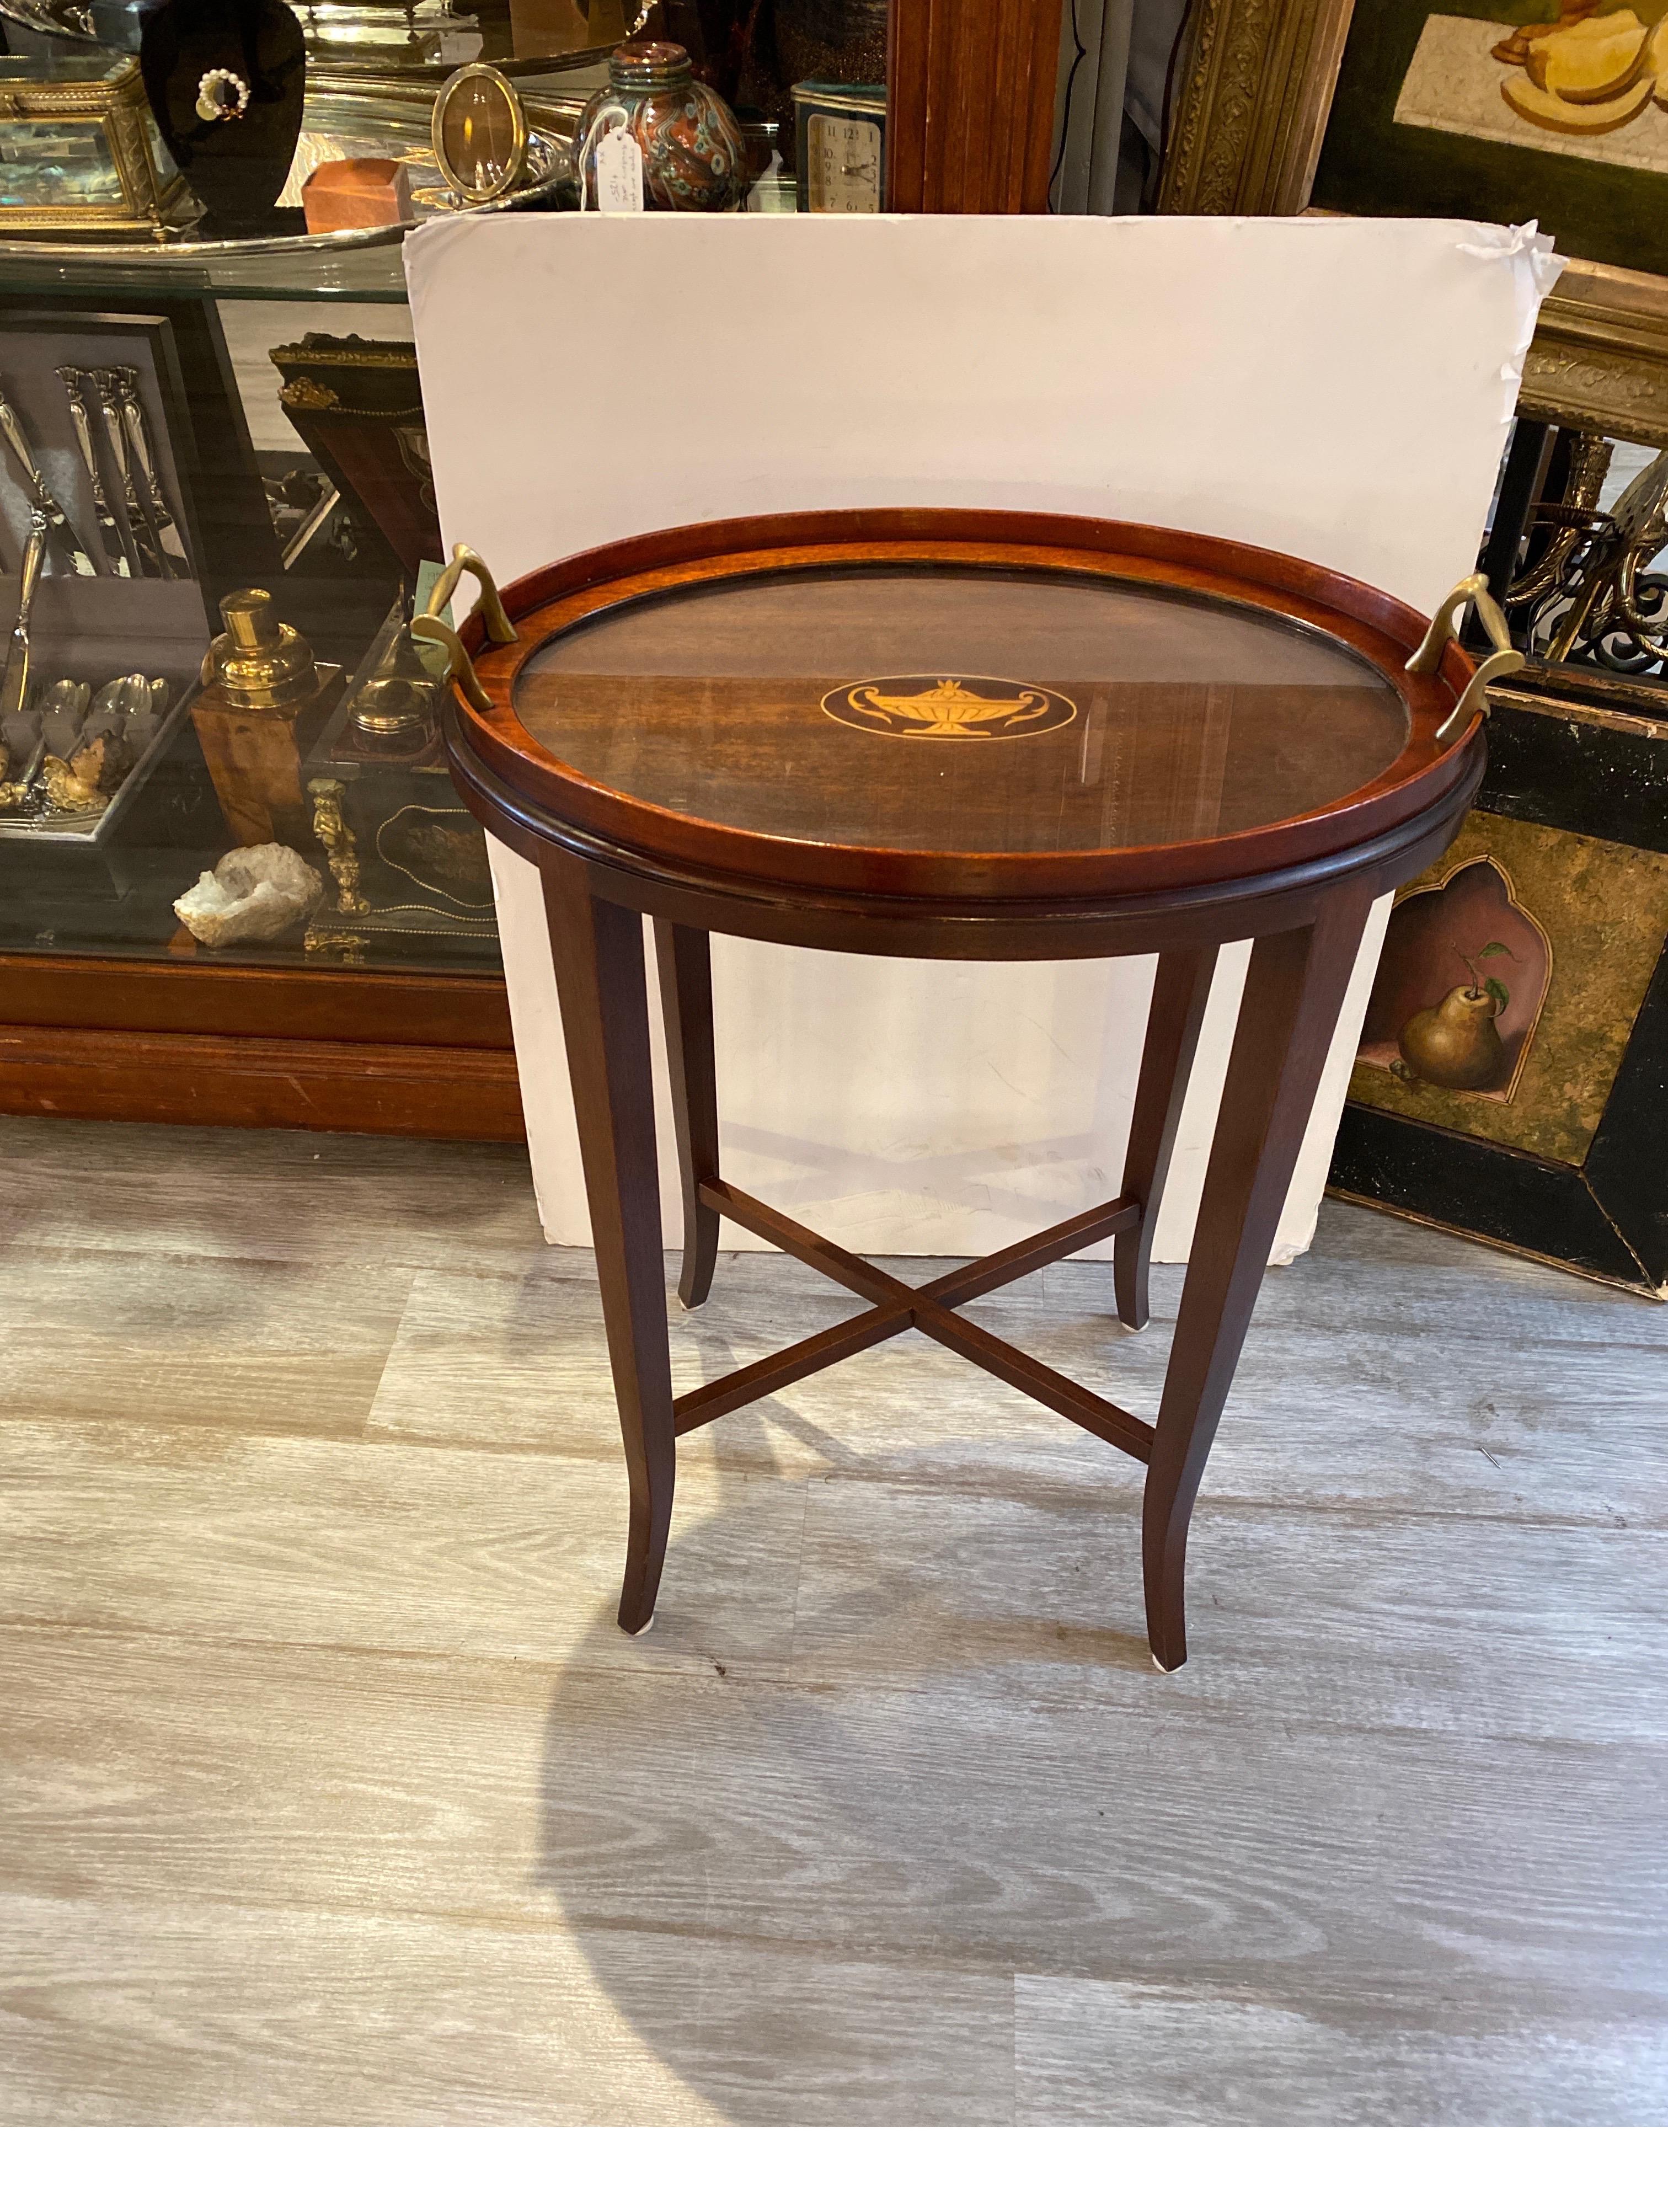 A diminutive tray top side table in mahogany with inlaid center. The removable fitted tray with brass handles and protective glass top. The later Custom base with Classic Hepplewhite style sabre legs. Measures: 19 wide, 13 deep, 26 high.